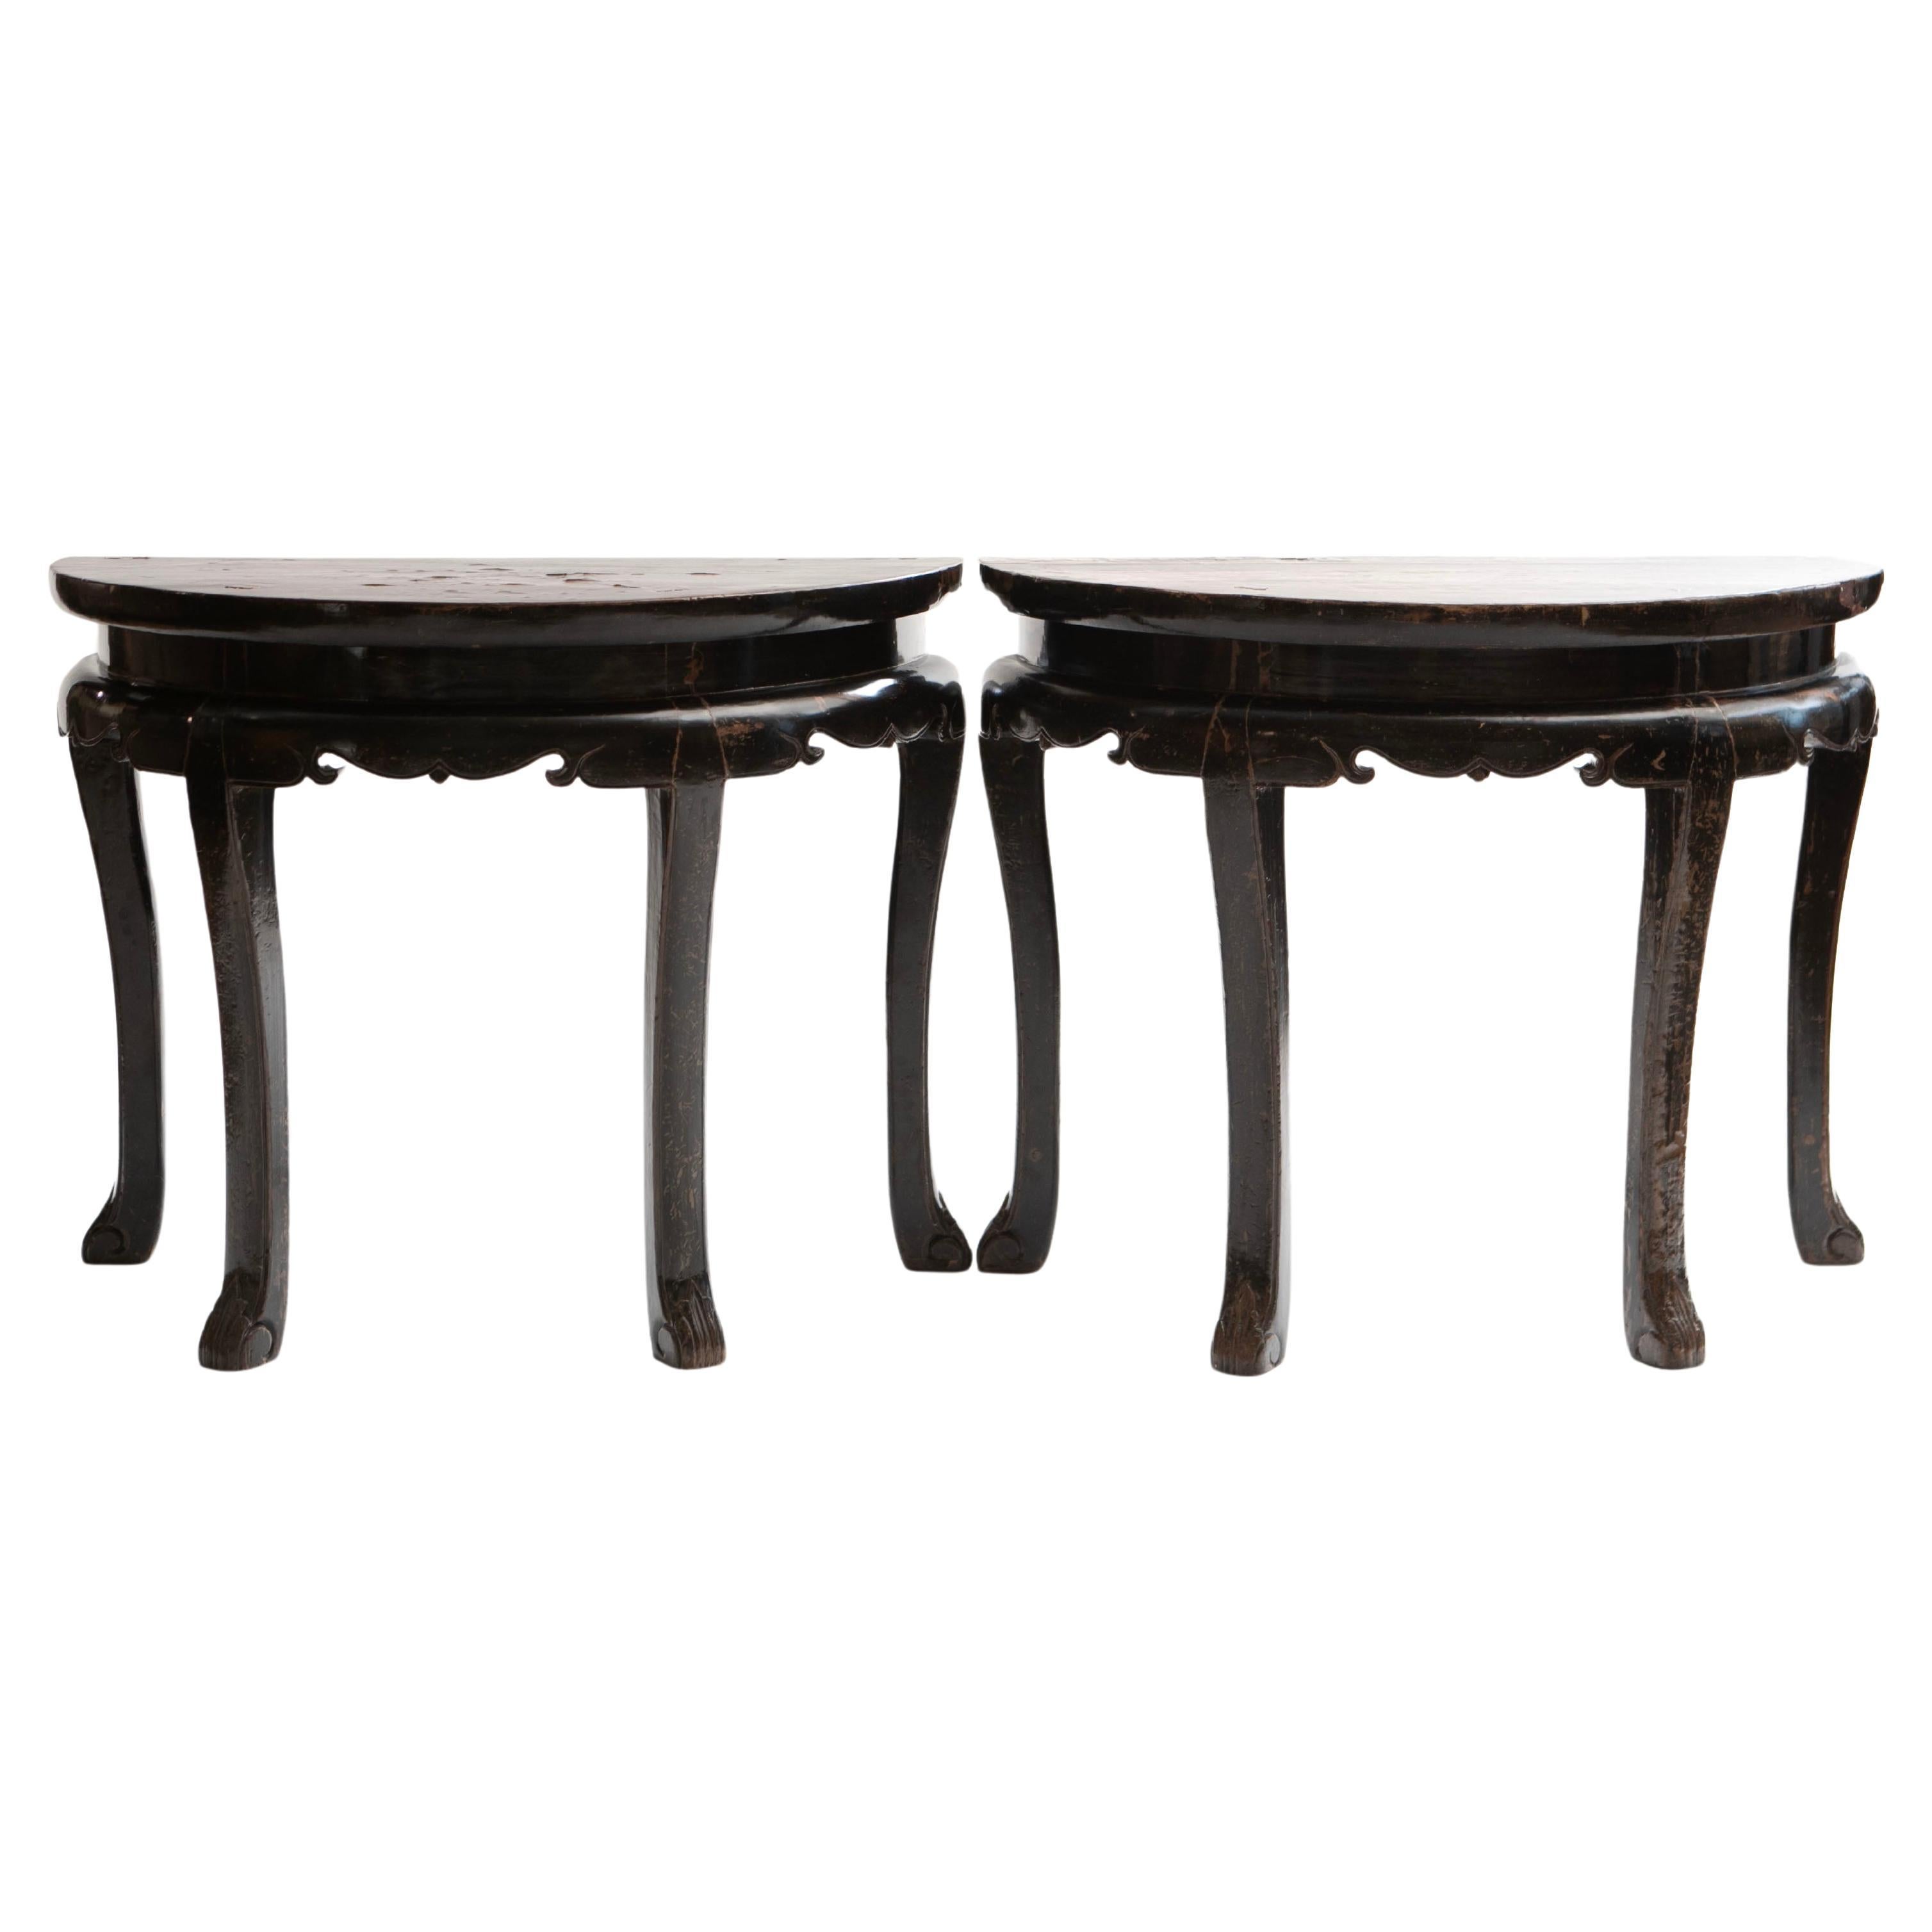 Pair of Qing Dynasty Demilune Console Tables ore center Table